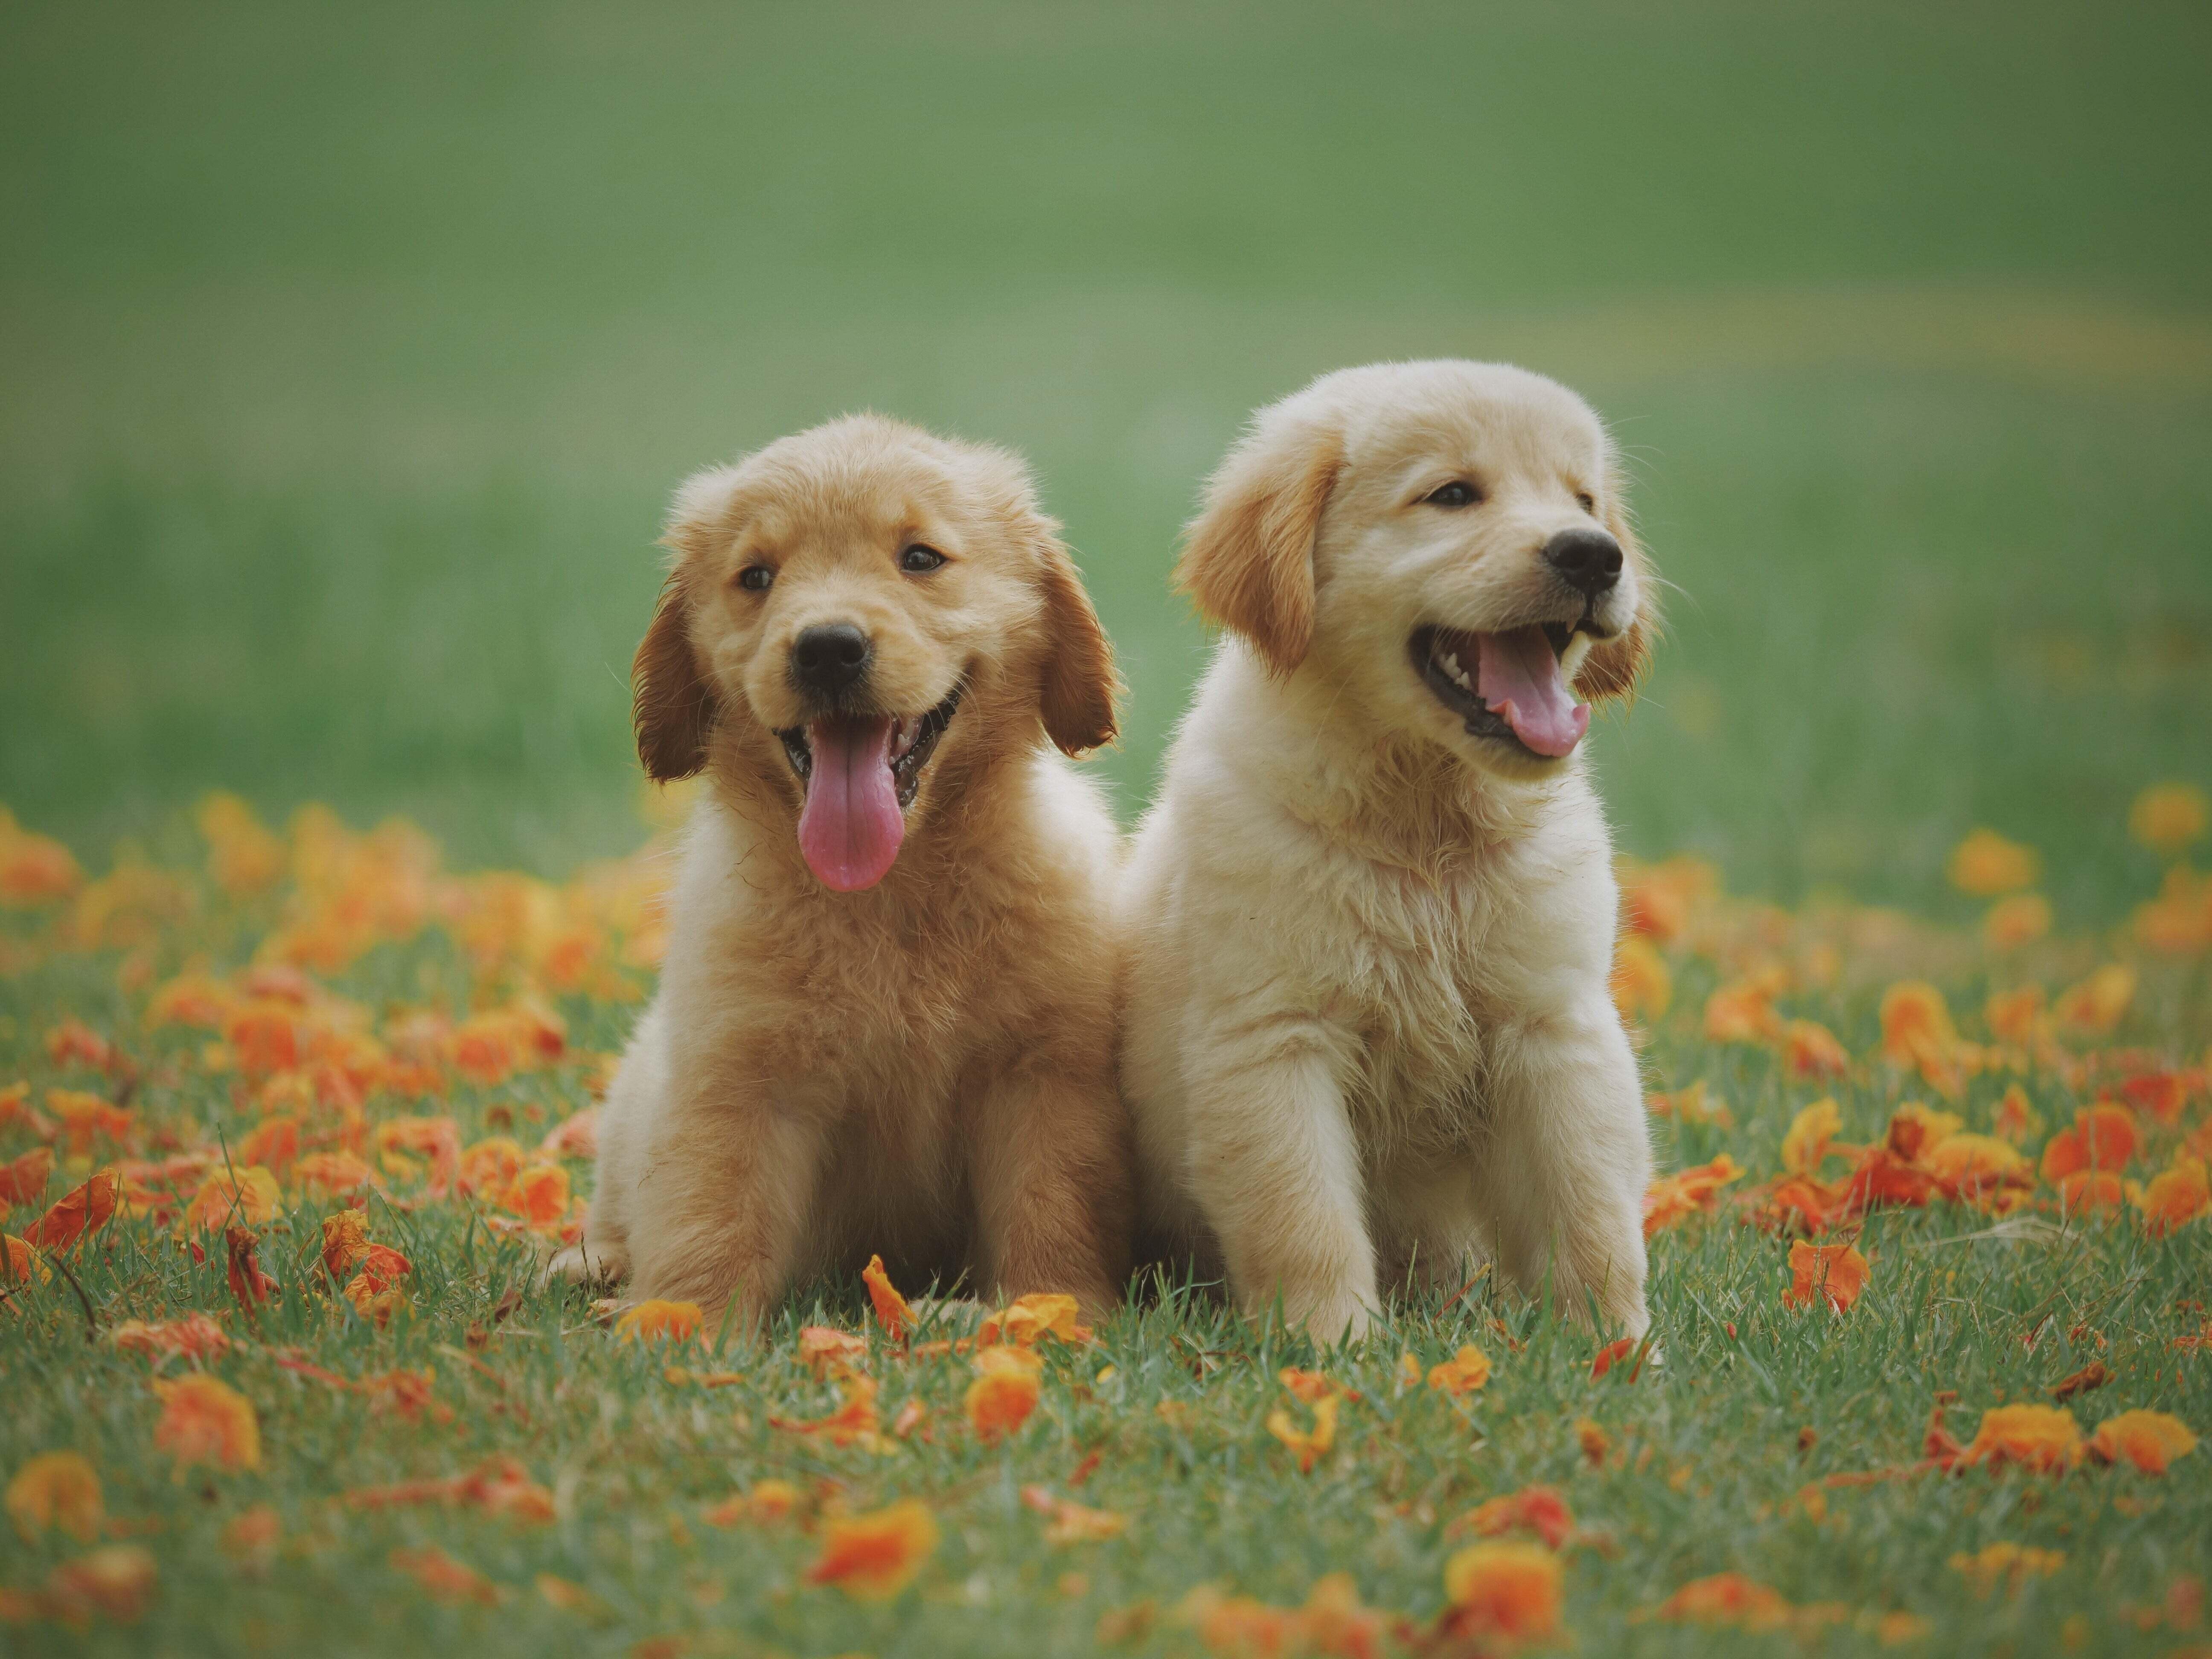 two fluffy puppies sitting in grass while smiling